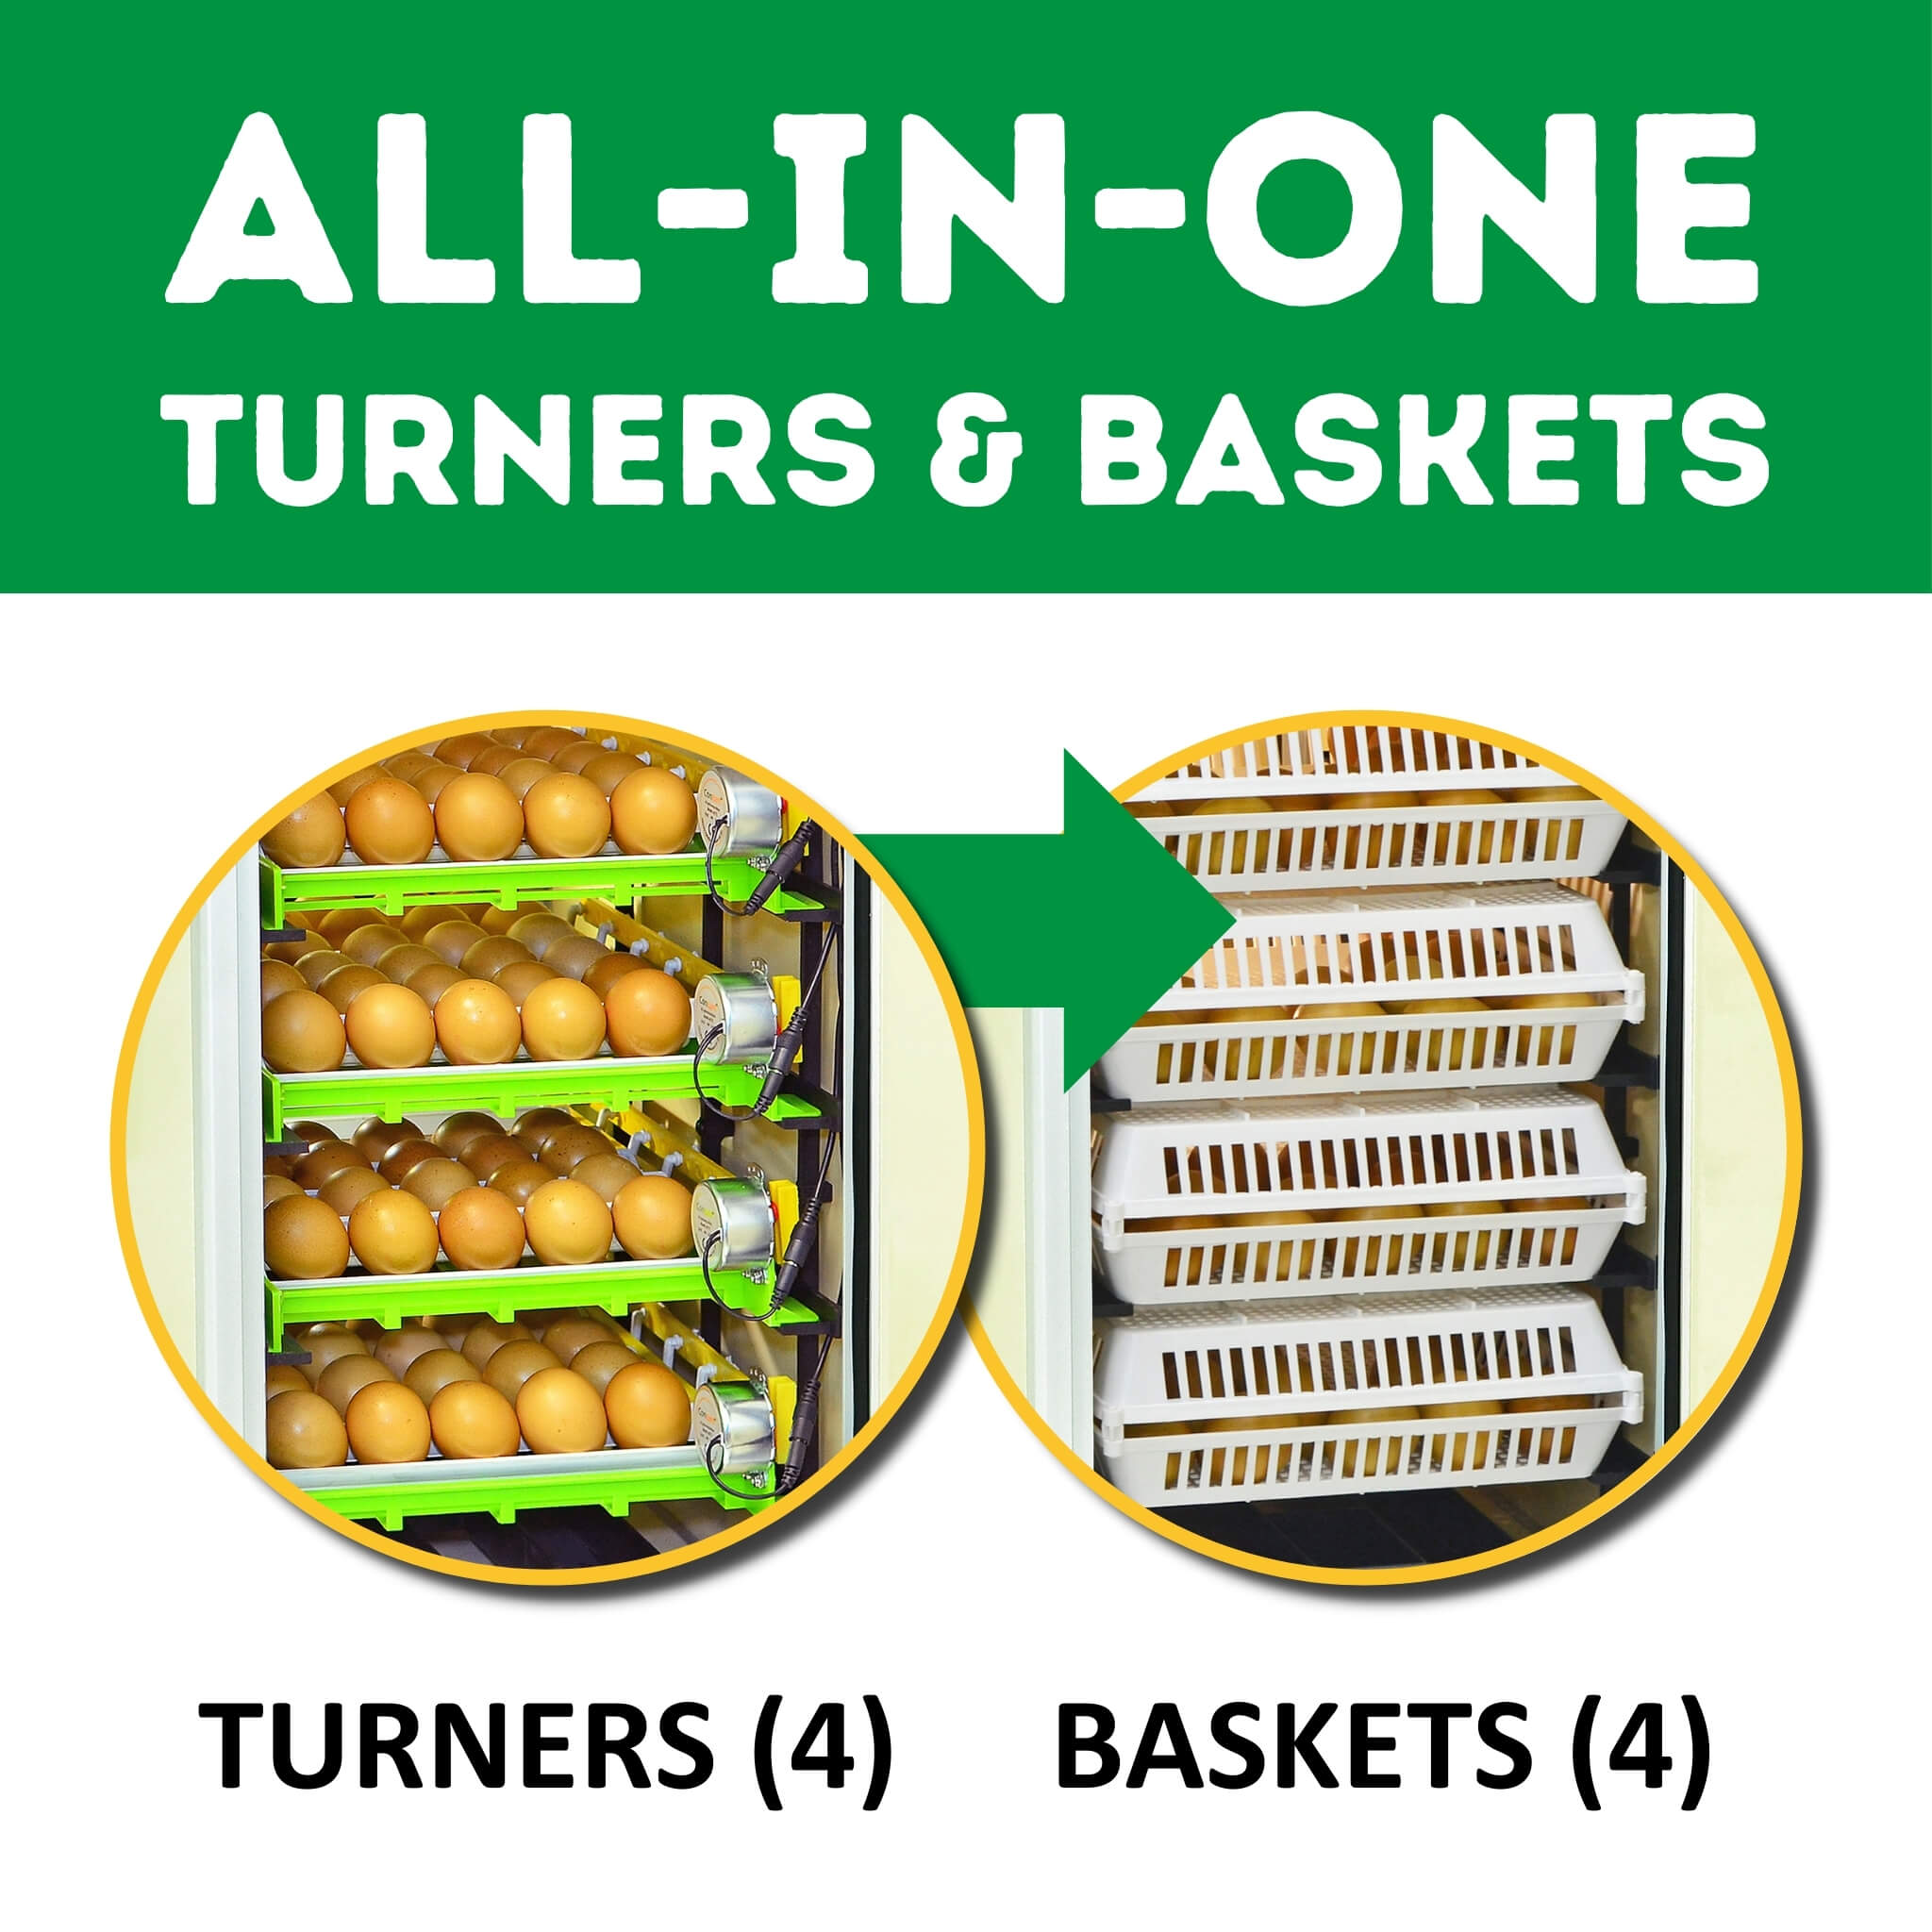 Hatching Time Cimuka. Infographic showing the All-in-one turners and baskets for the CT120 egg incubator. Image shows that incubator can hold up to 4 turners and 4 baskets.